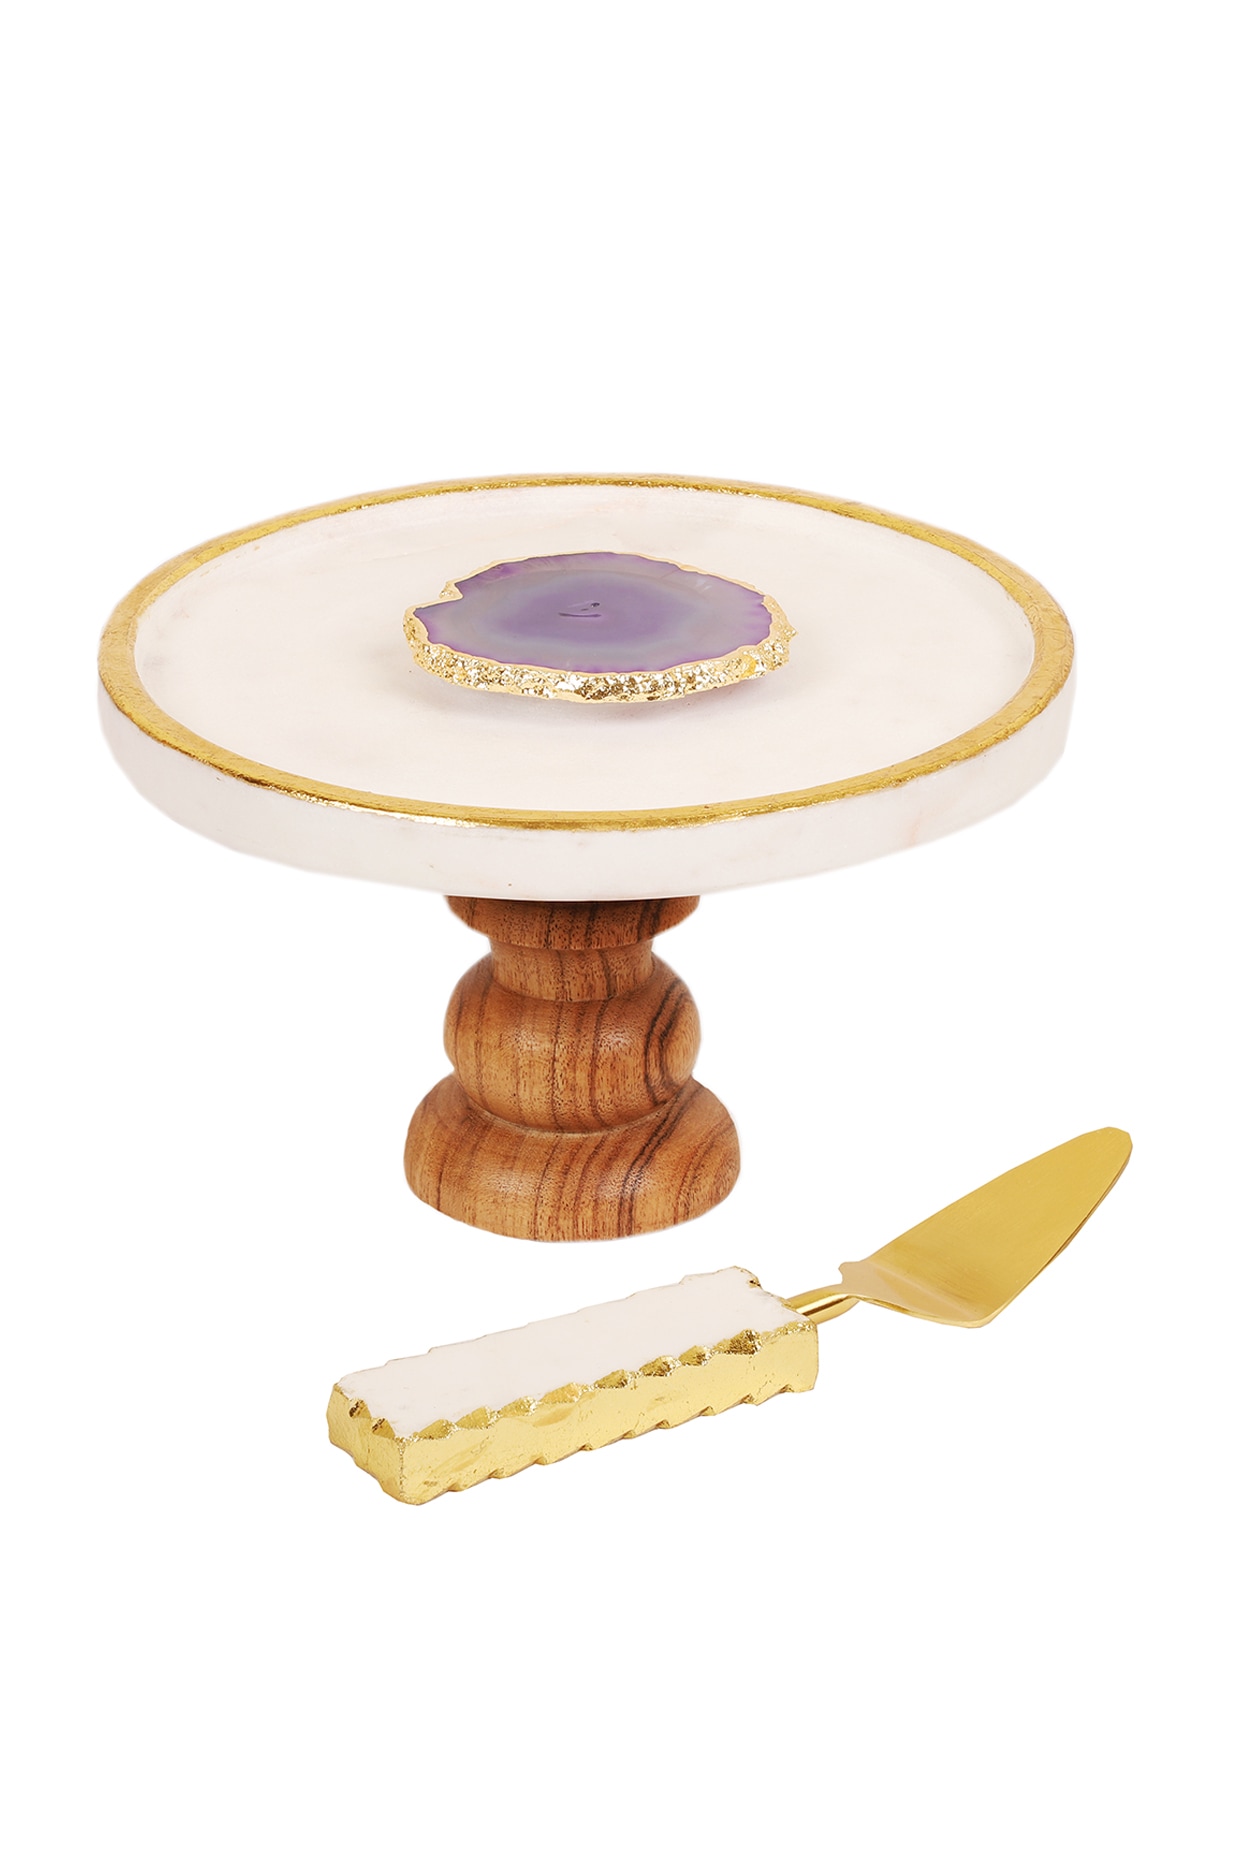 Buy Cake Turntable Cake Stand Spinner for Cake Decorations at Best Price in  Pakistan